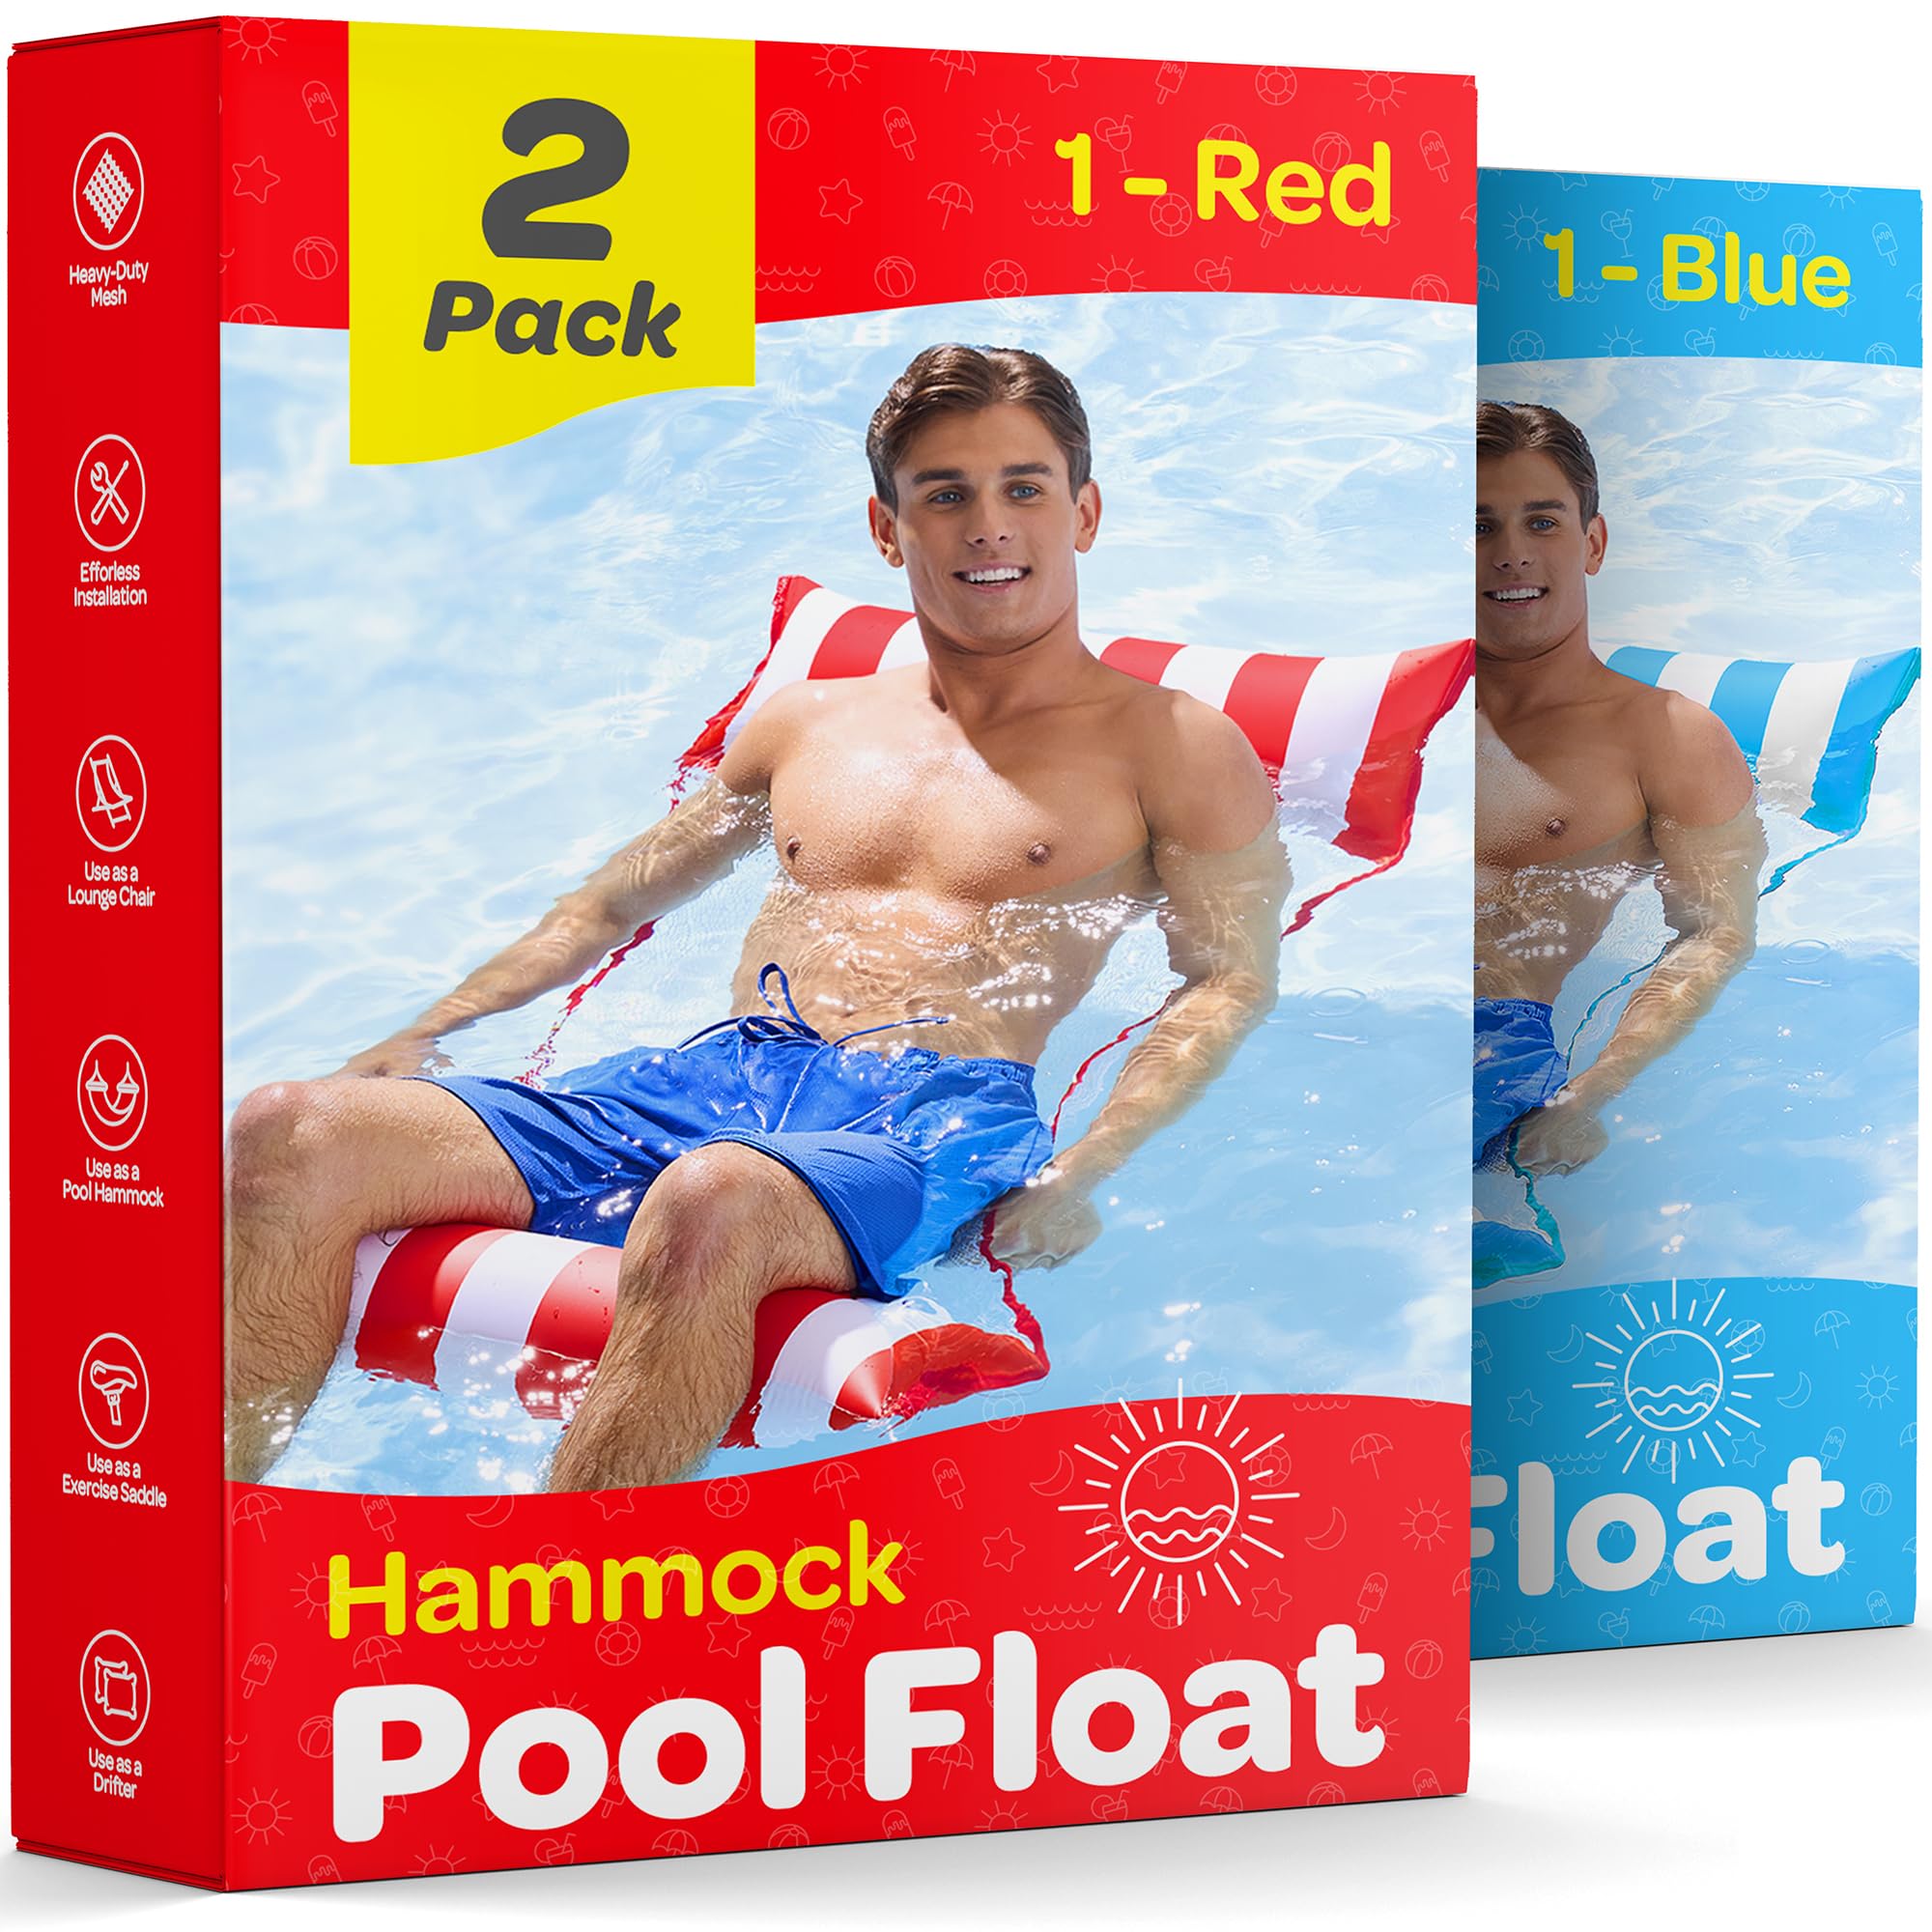 Pool Floats for Adults Multi-Purpose Hammock Pool Float: Saddle, Lounge Chair, Hammock, Drifter - Water Hammock for Adults in Swimming Pools - Blue/Red Fun Colors Pool Float Lounger (44" X 26")  - Very Good